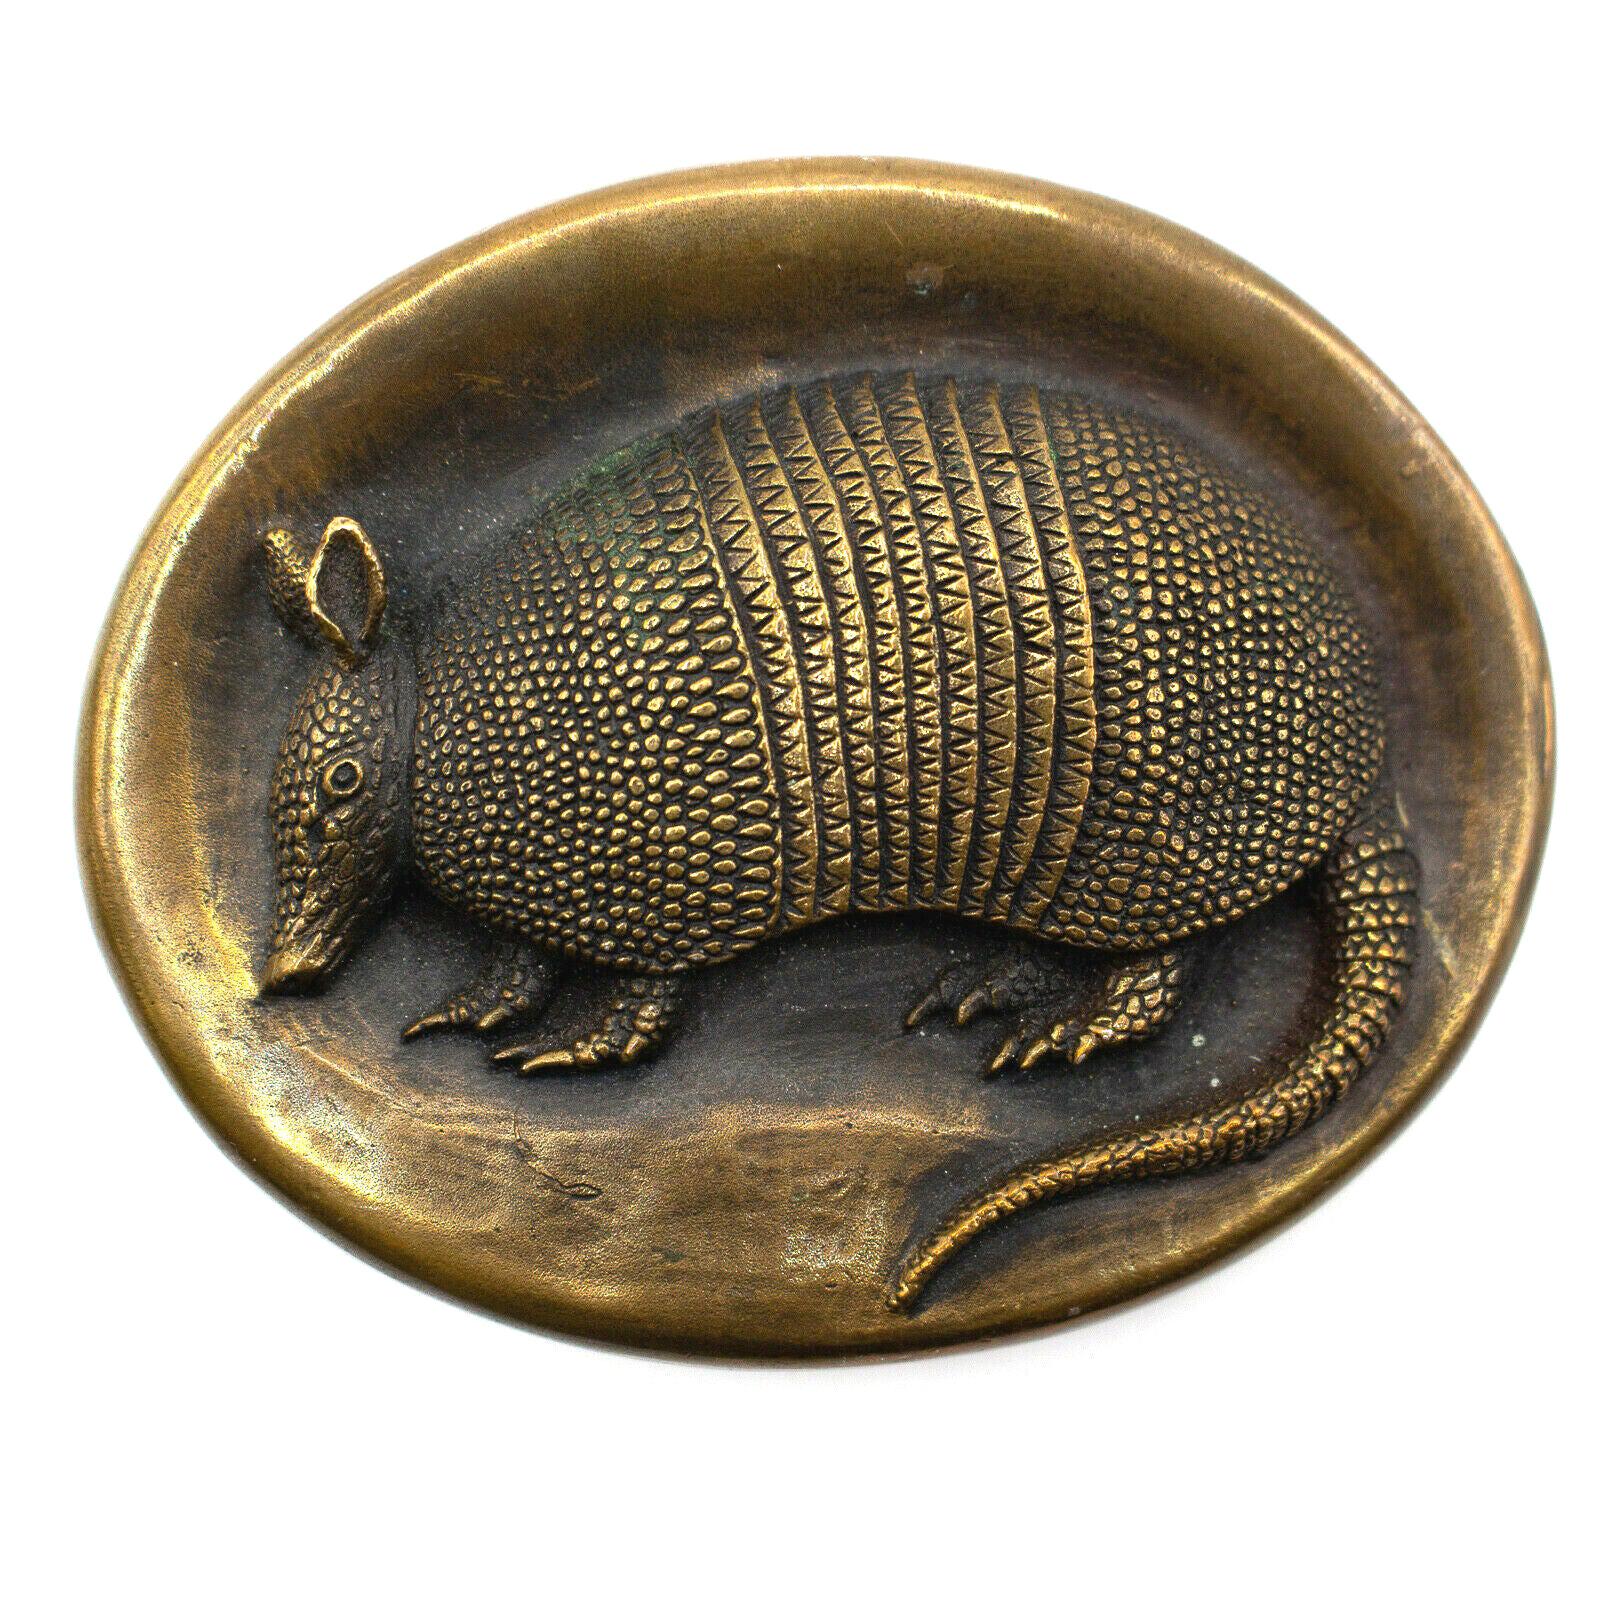 Armadillo Texas Etched Metal Belt Buckle